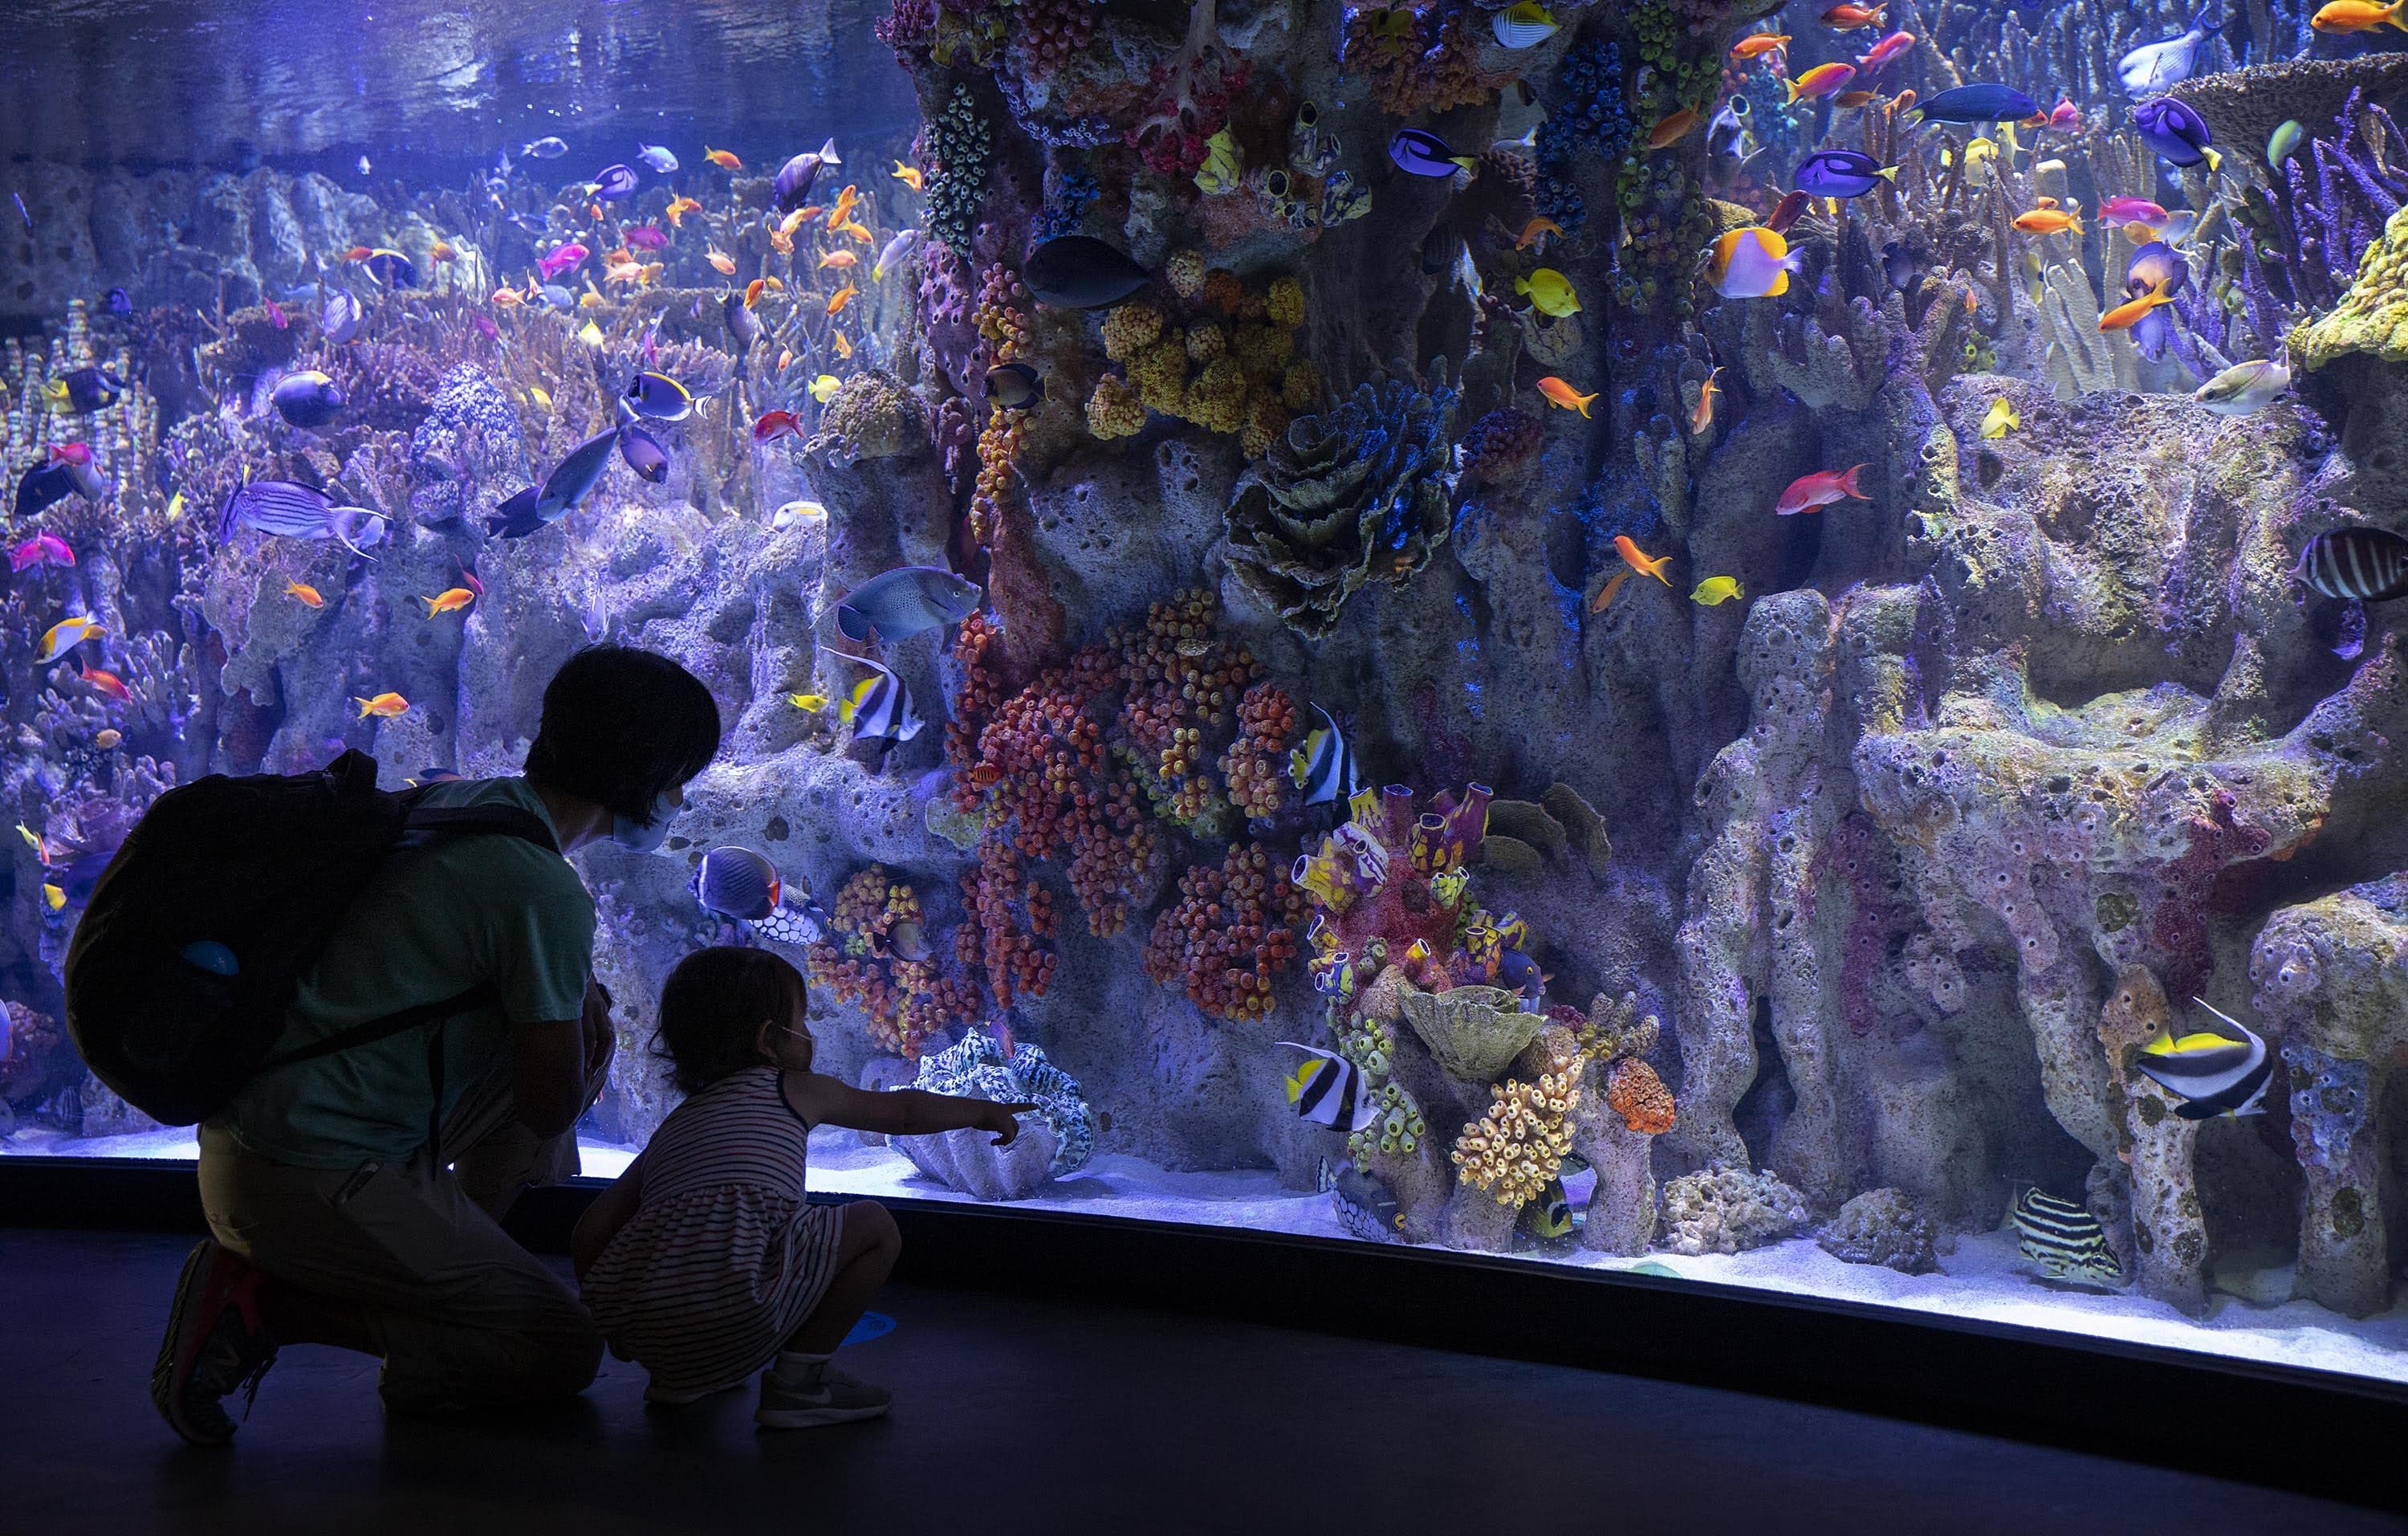 As the New England Aquarium opens for the first time since March, visitors, wearing masks and following social distancing instructions, look at fish in a tropical fish tank. (Robin Lubbock/WBUR)